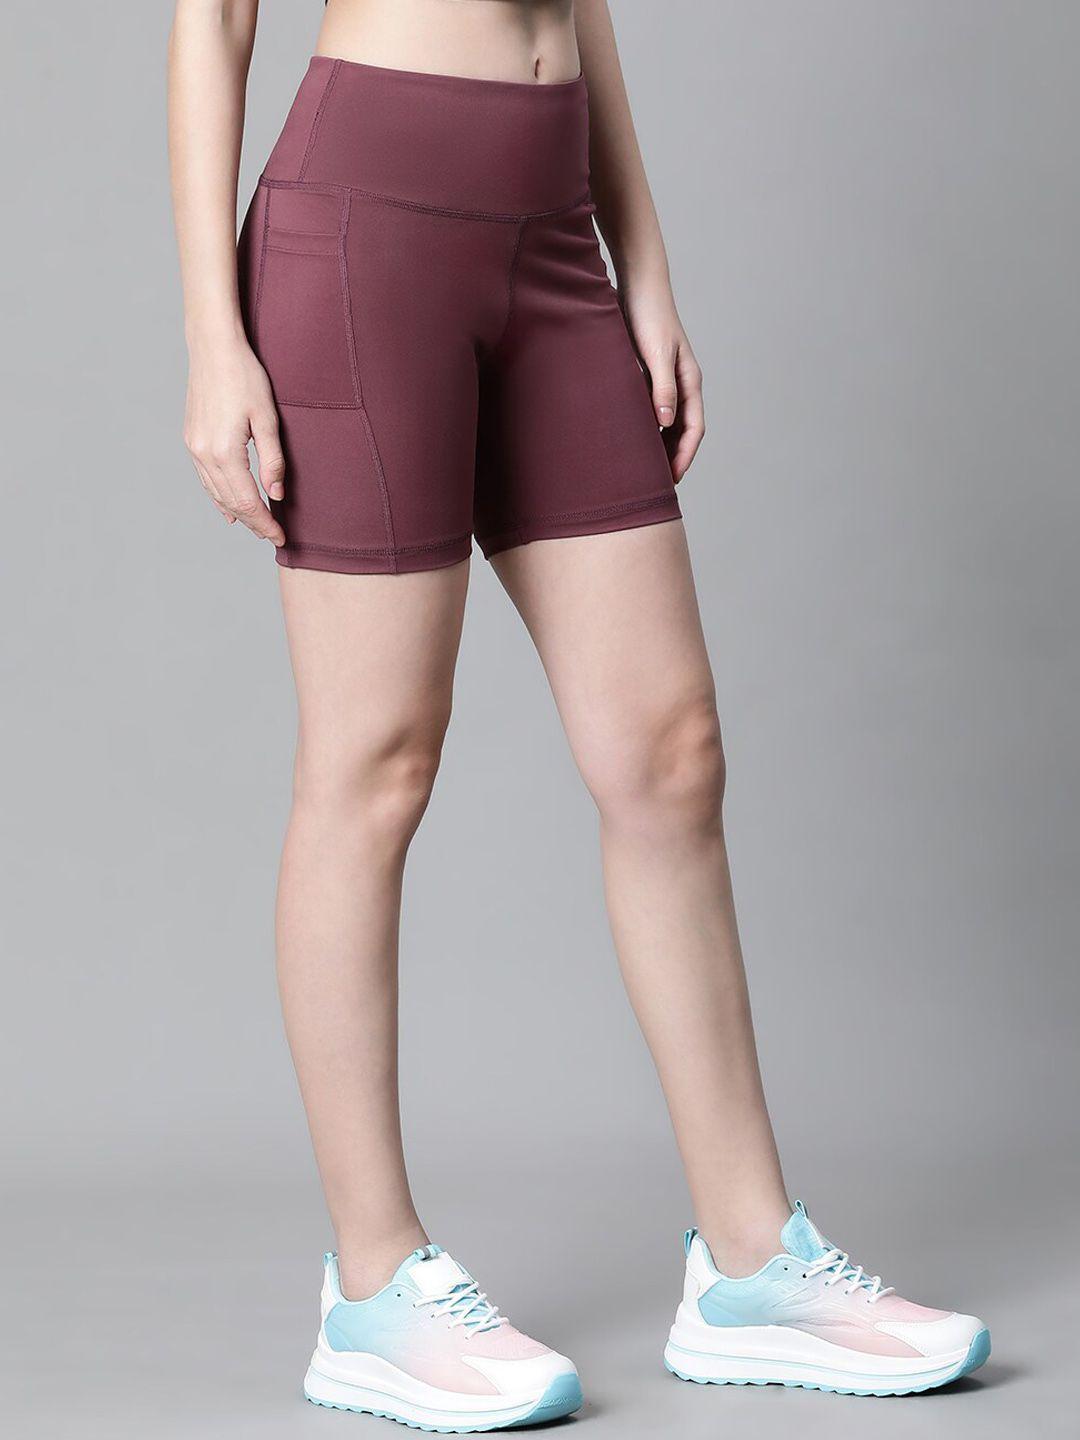 athlisis women mauve skinny fit training or gym sports shorts with e-dry technology technology